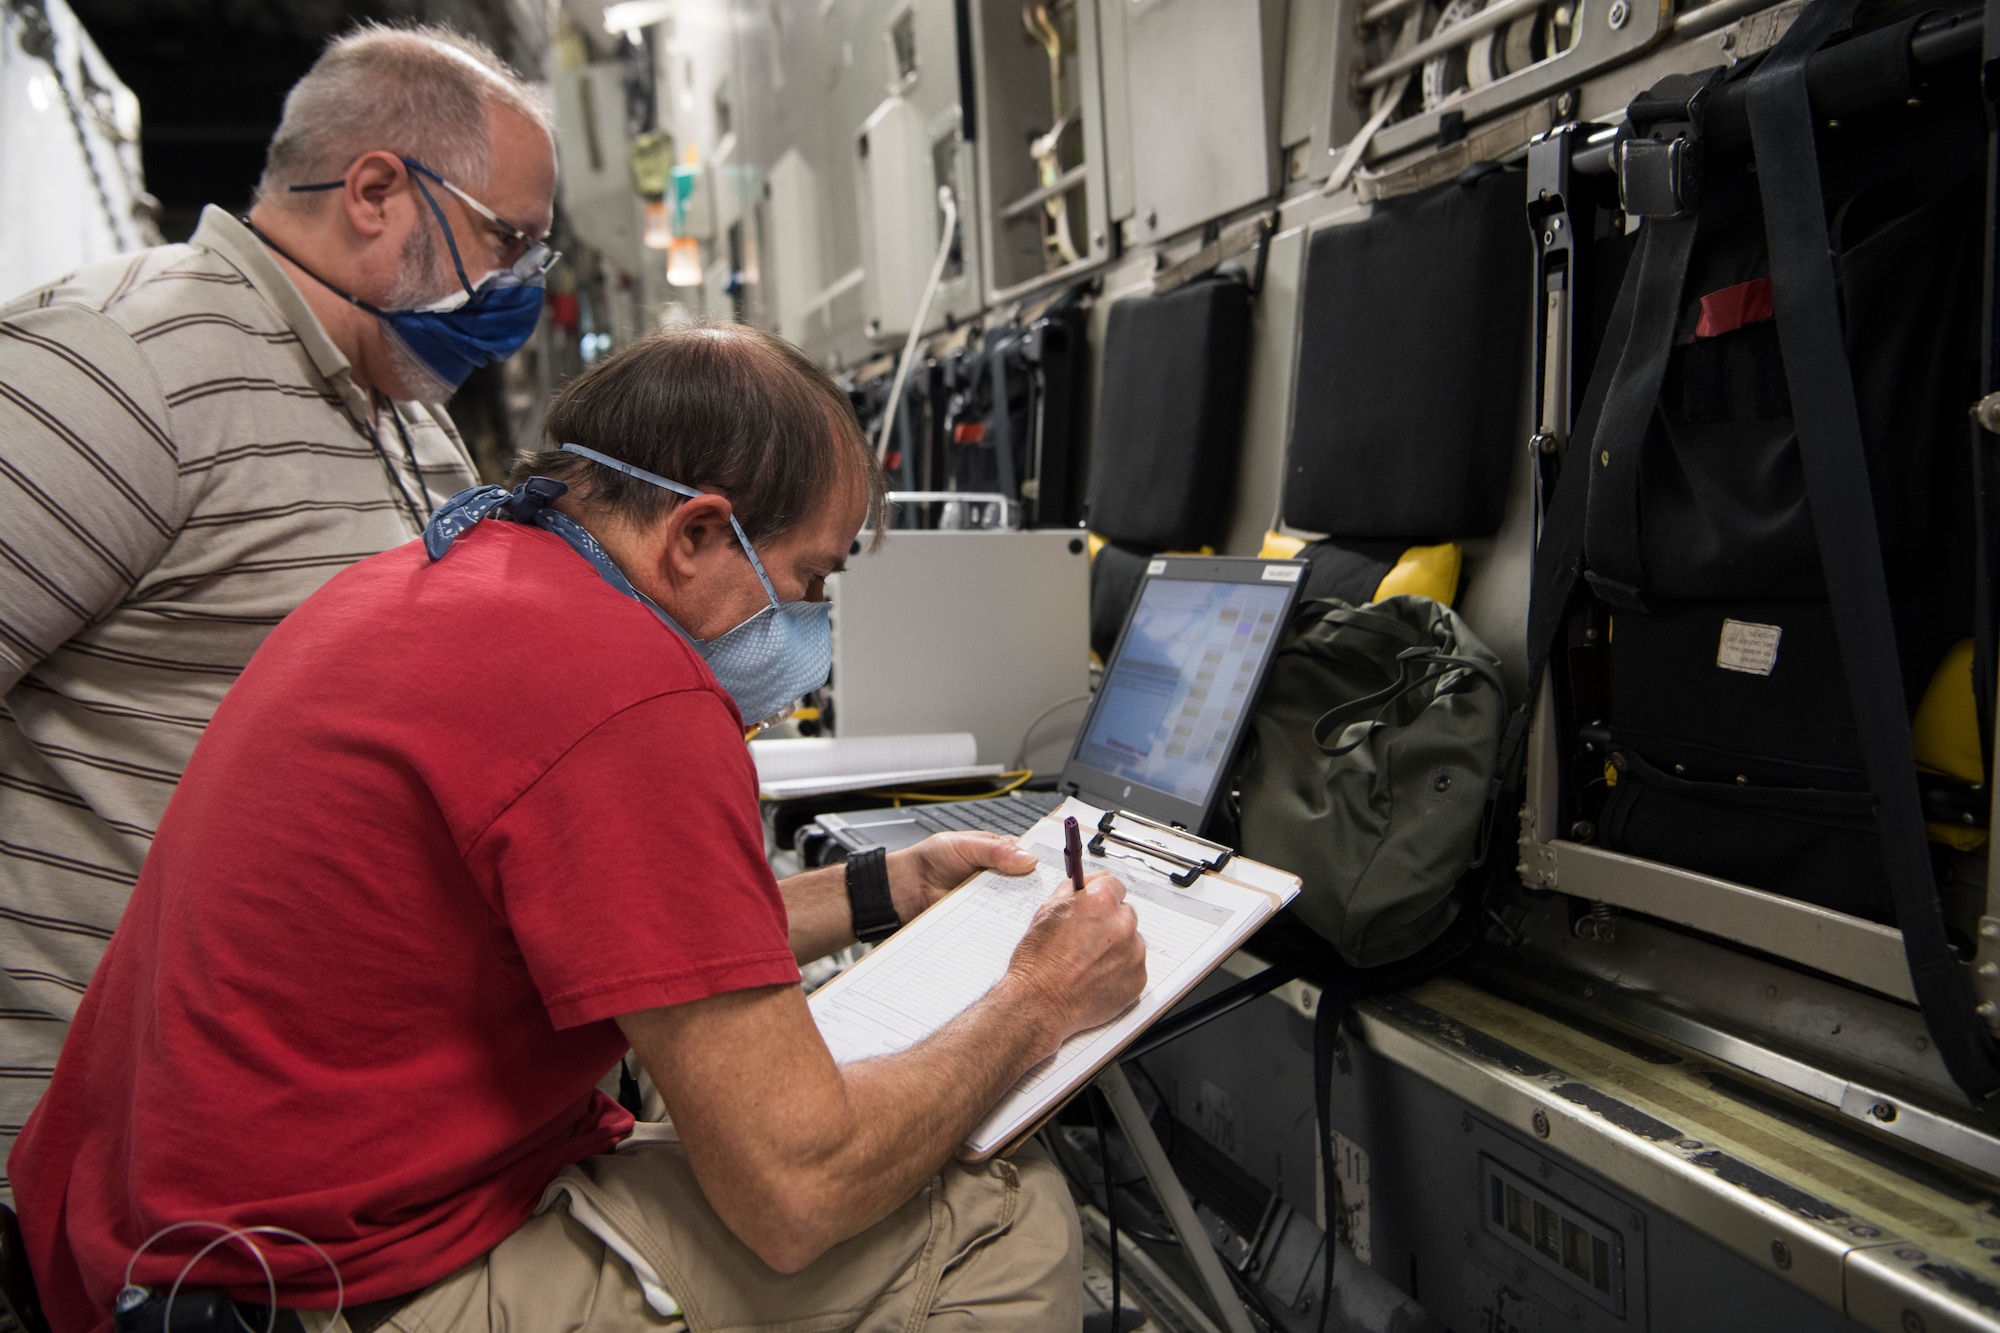 Victor Arca, 28th Test and Evaluation Squadron senior test engineer, and Gabriel Intano, Army Public Health Center microbiologist, record and analyze data after a trial movement and purge through a Portable Bio-Containment Module loaded onto a C-17 Globemaster III at Joint Base Charleston S.C., April 15, 2020. Members from the 28th TES and Army PHC tested the PBCM, which will be exercised regularly to transport COVID patients and medical personnel, all while ensuring the aircrew is impervious to risk of infection. (U.S. Air Force photo by Staff Sgt. Chris Drzazgowski)